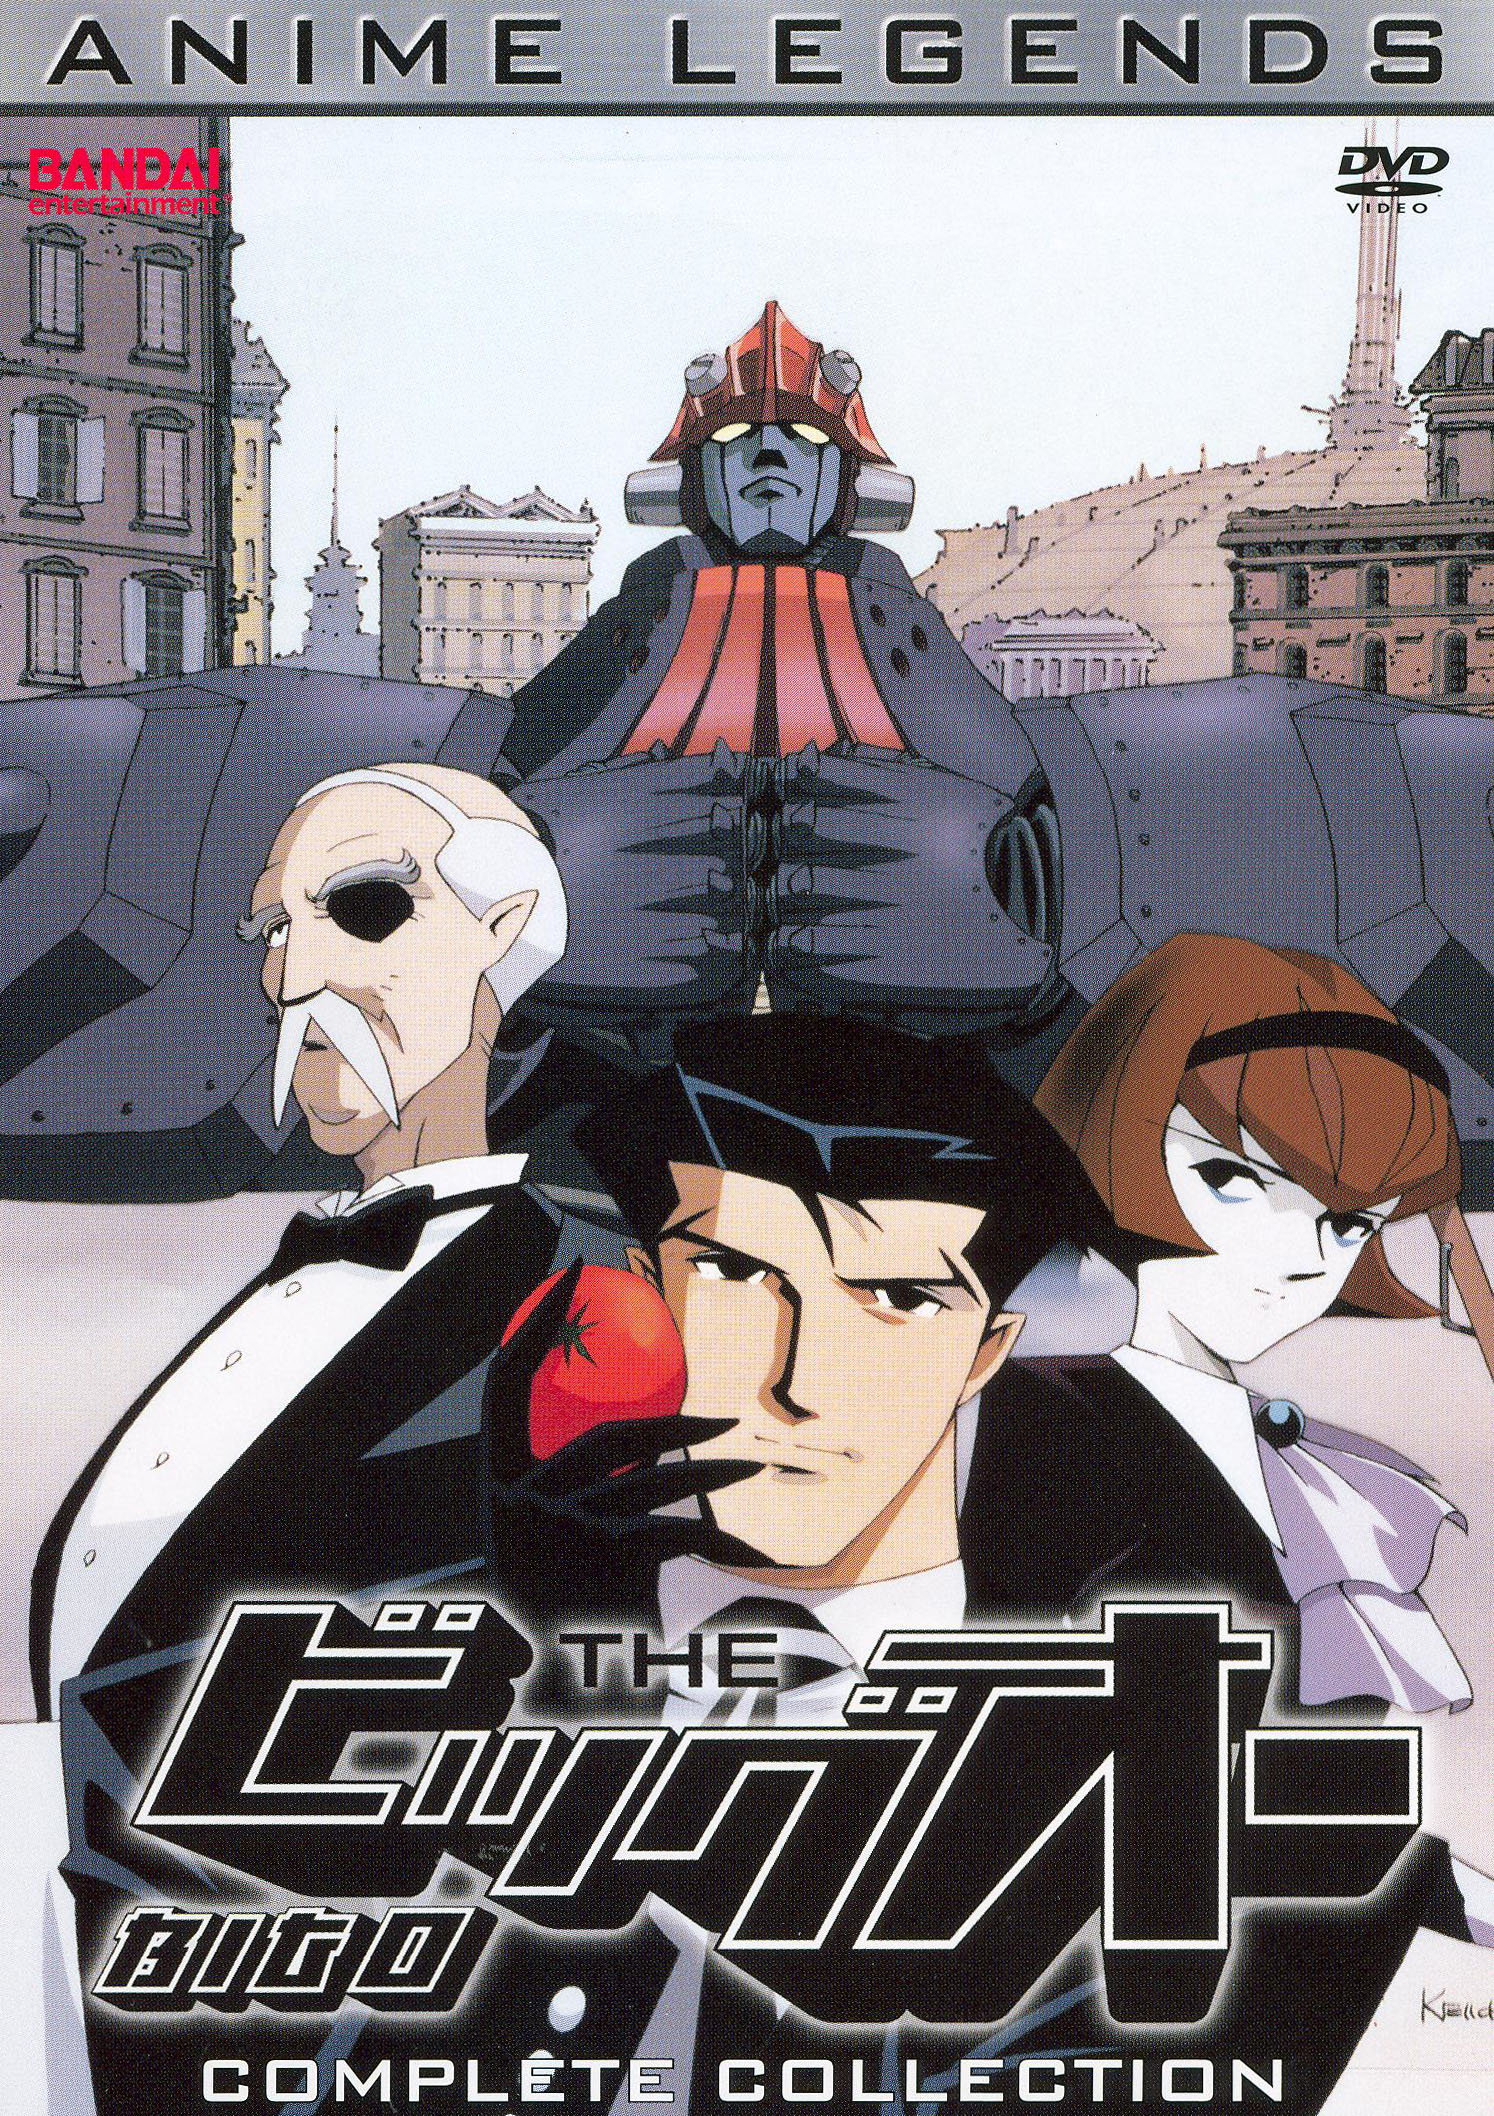 Best Buy: The Big O: Anime Legends Complete Collection [4 Discs] [DVD]